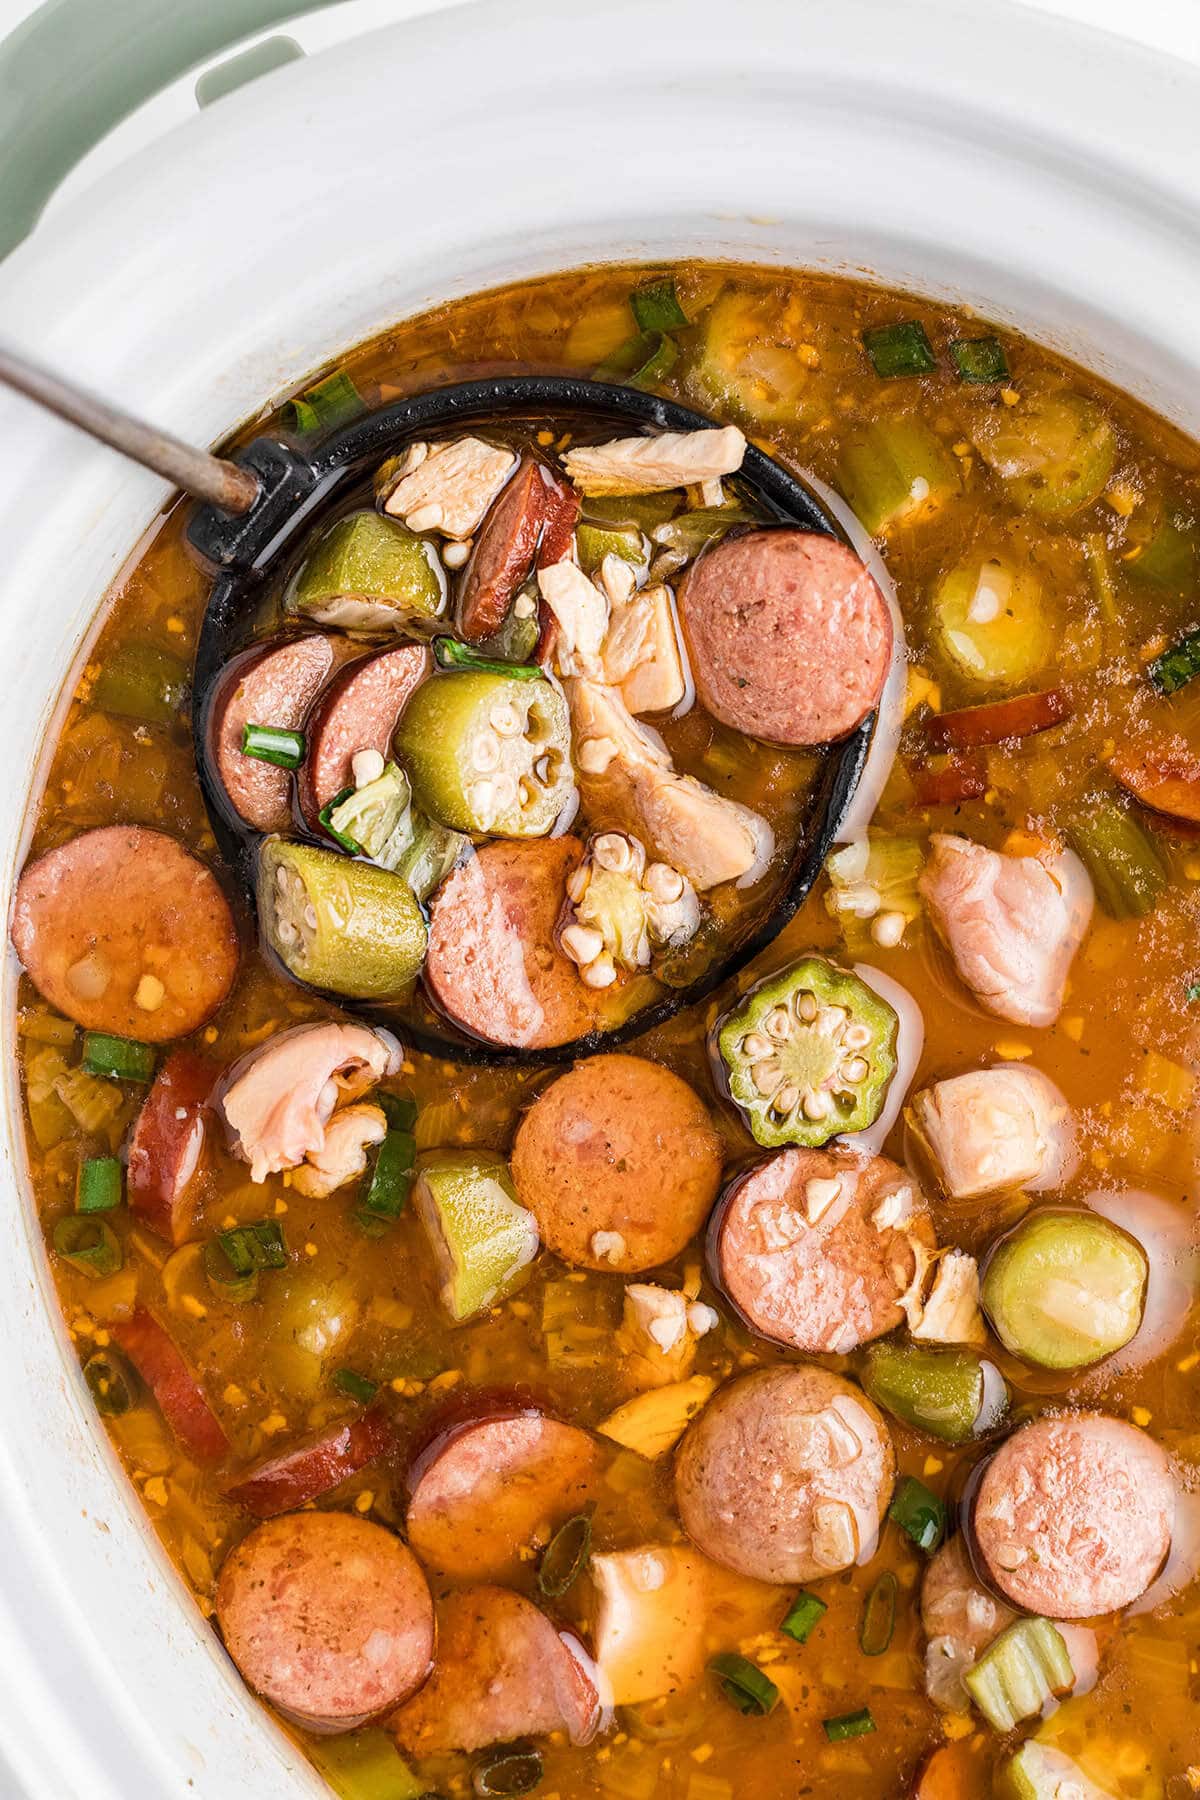 Slow cooker filled with chicken and sausage gumbo with a serving ladle.